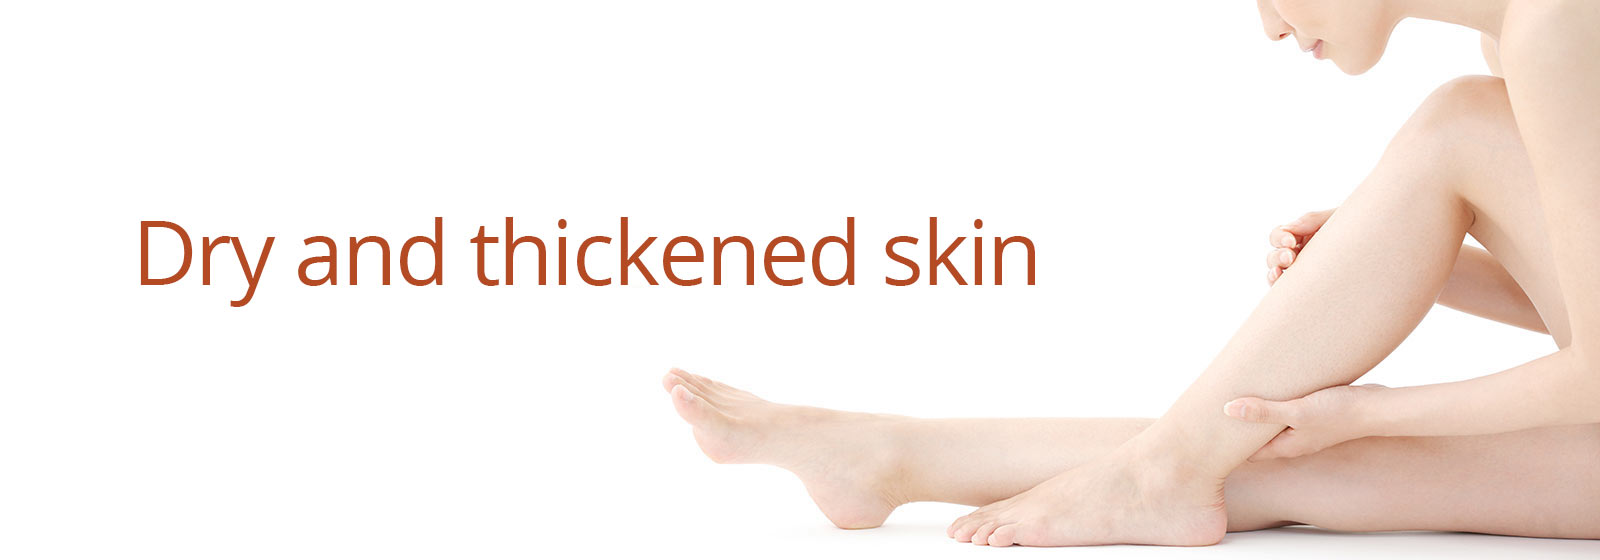 Dry and thickened skin